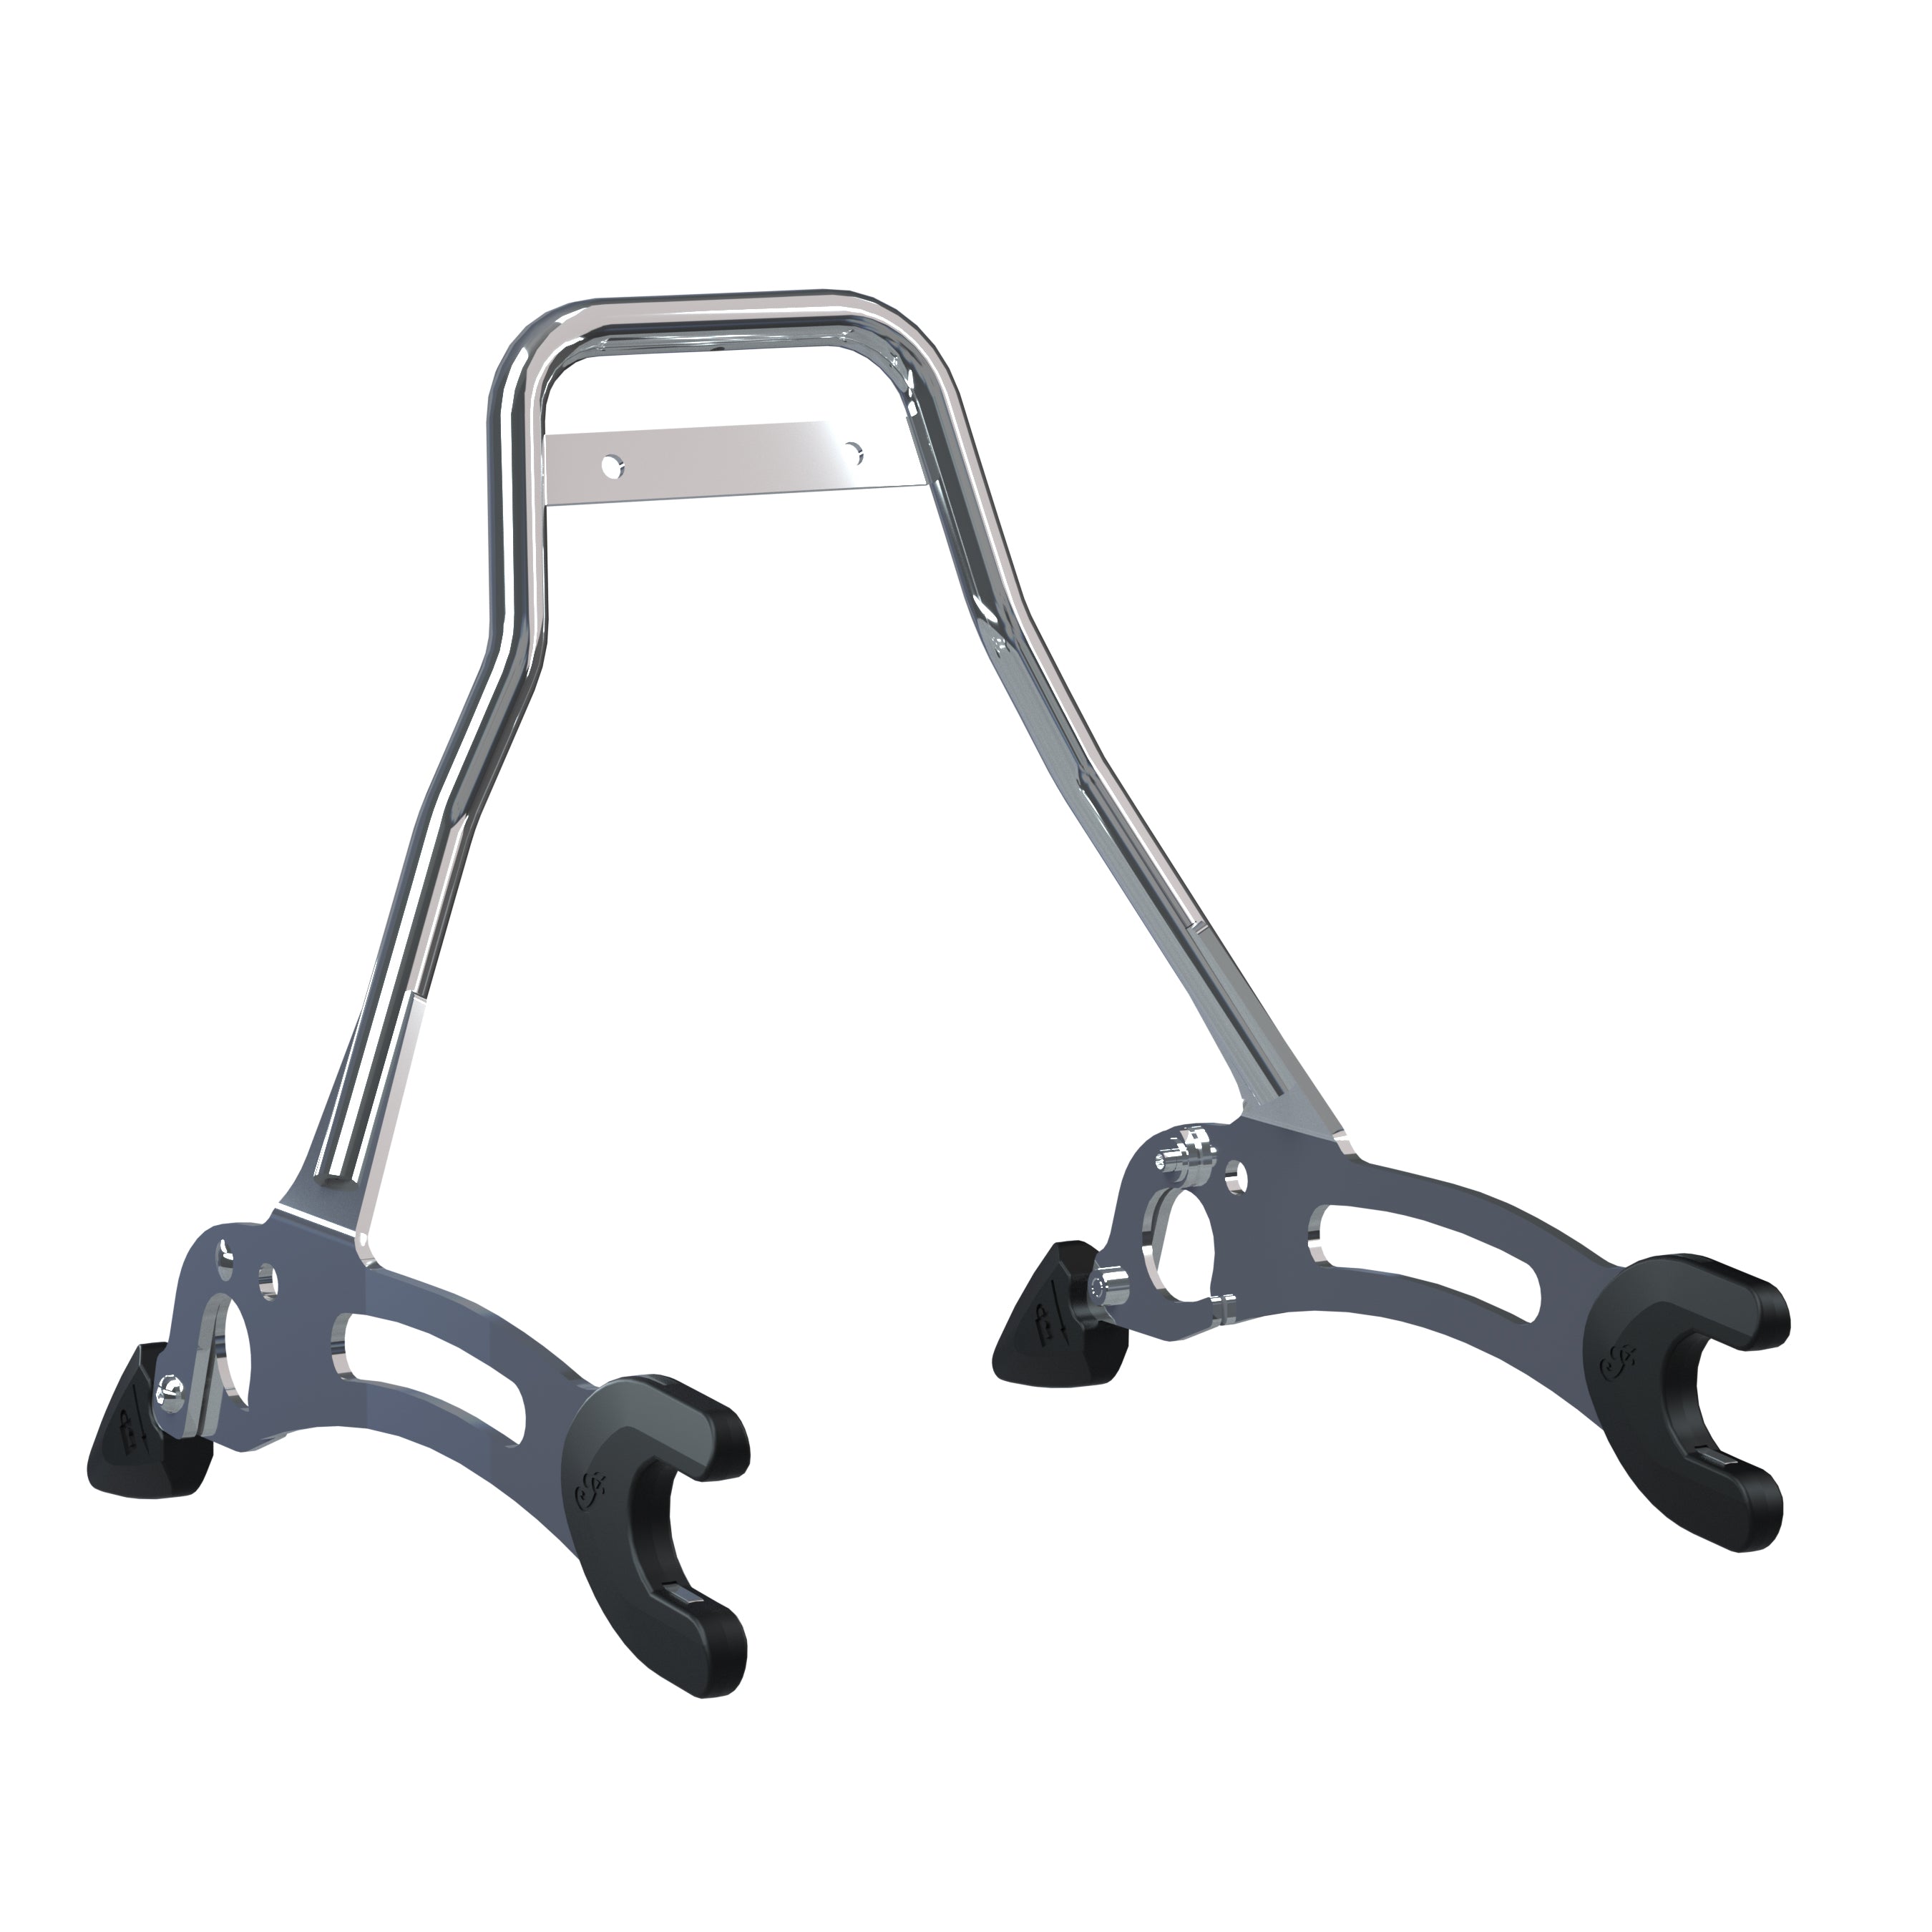 Low Profile Quick Release Passenger Sissy Bar, Chrome